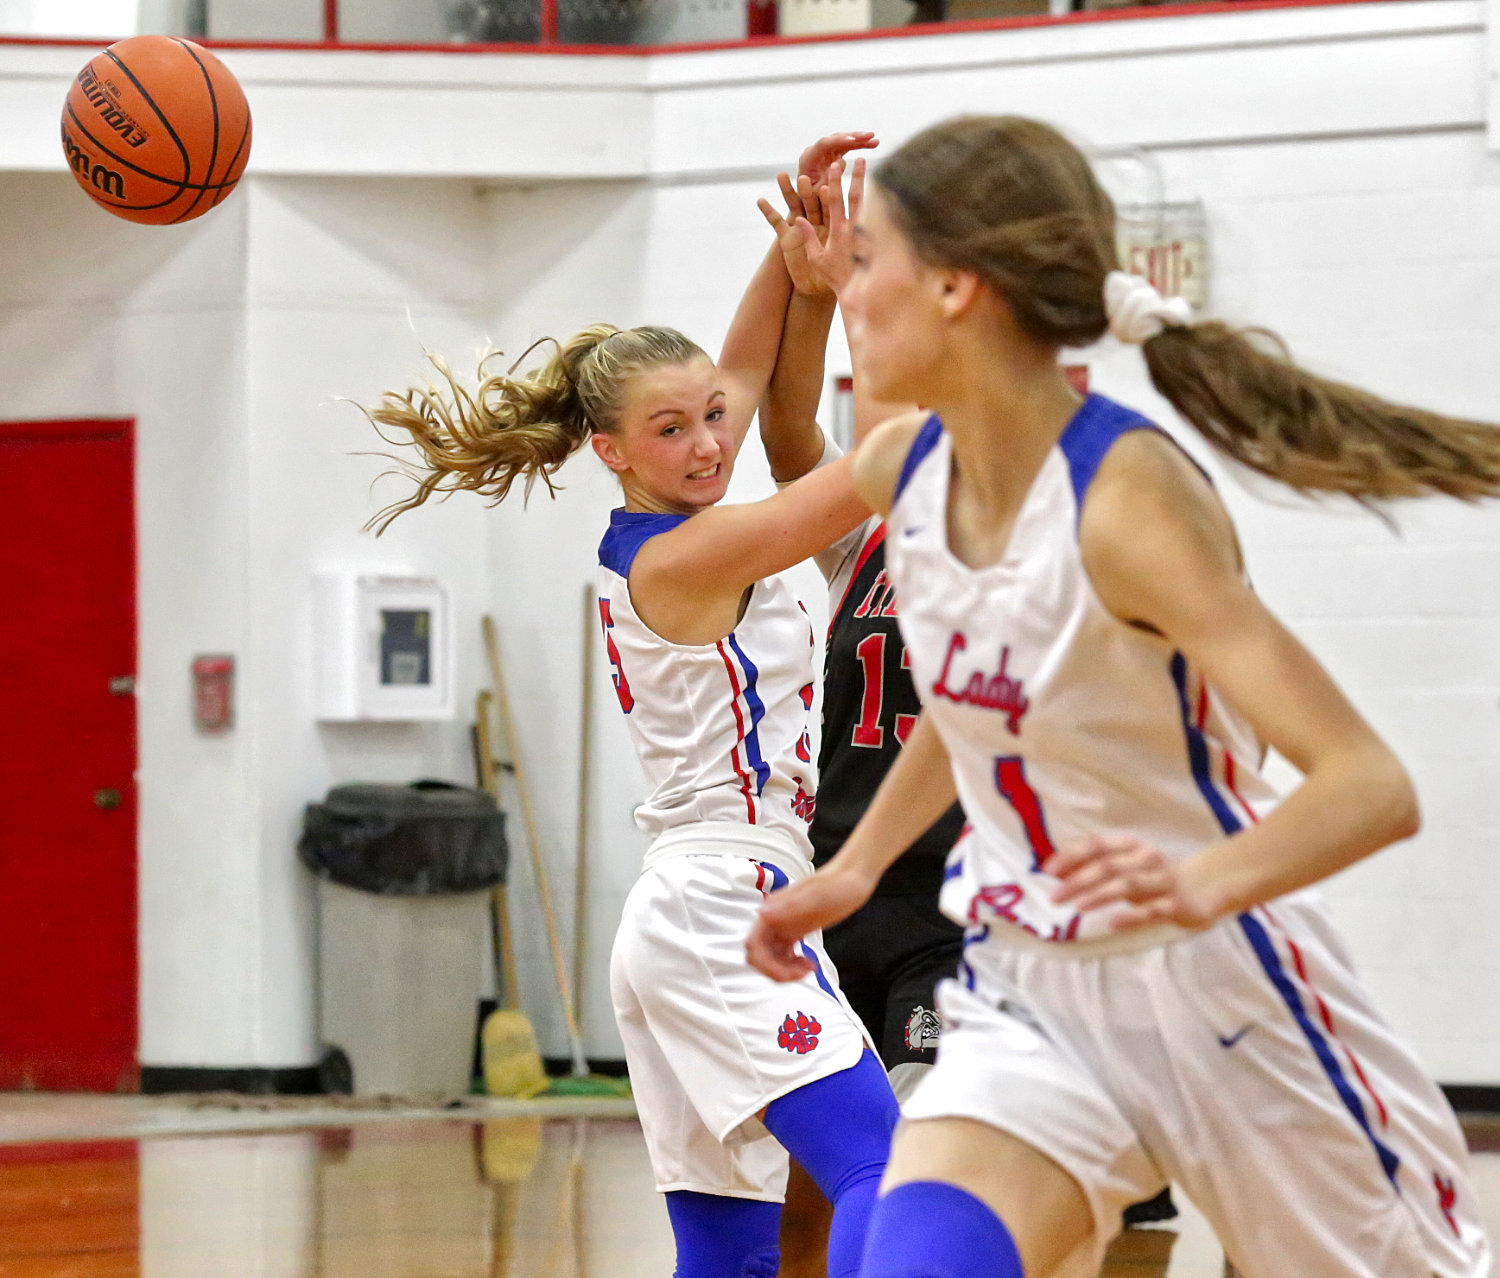 Lady Panther Bella Crawford deflects a Kilgore pass, as teammate Crimson Bryant moves in to secure the loose ball.